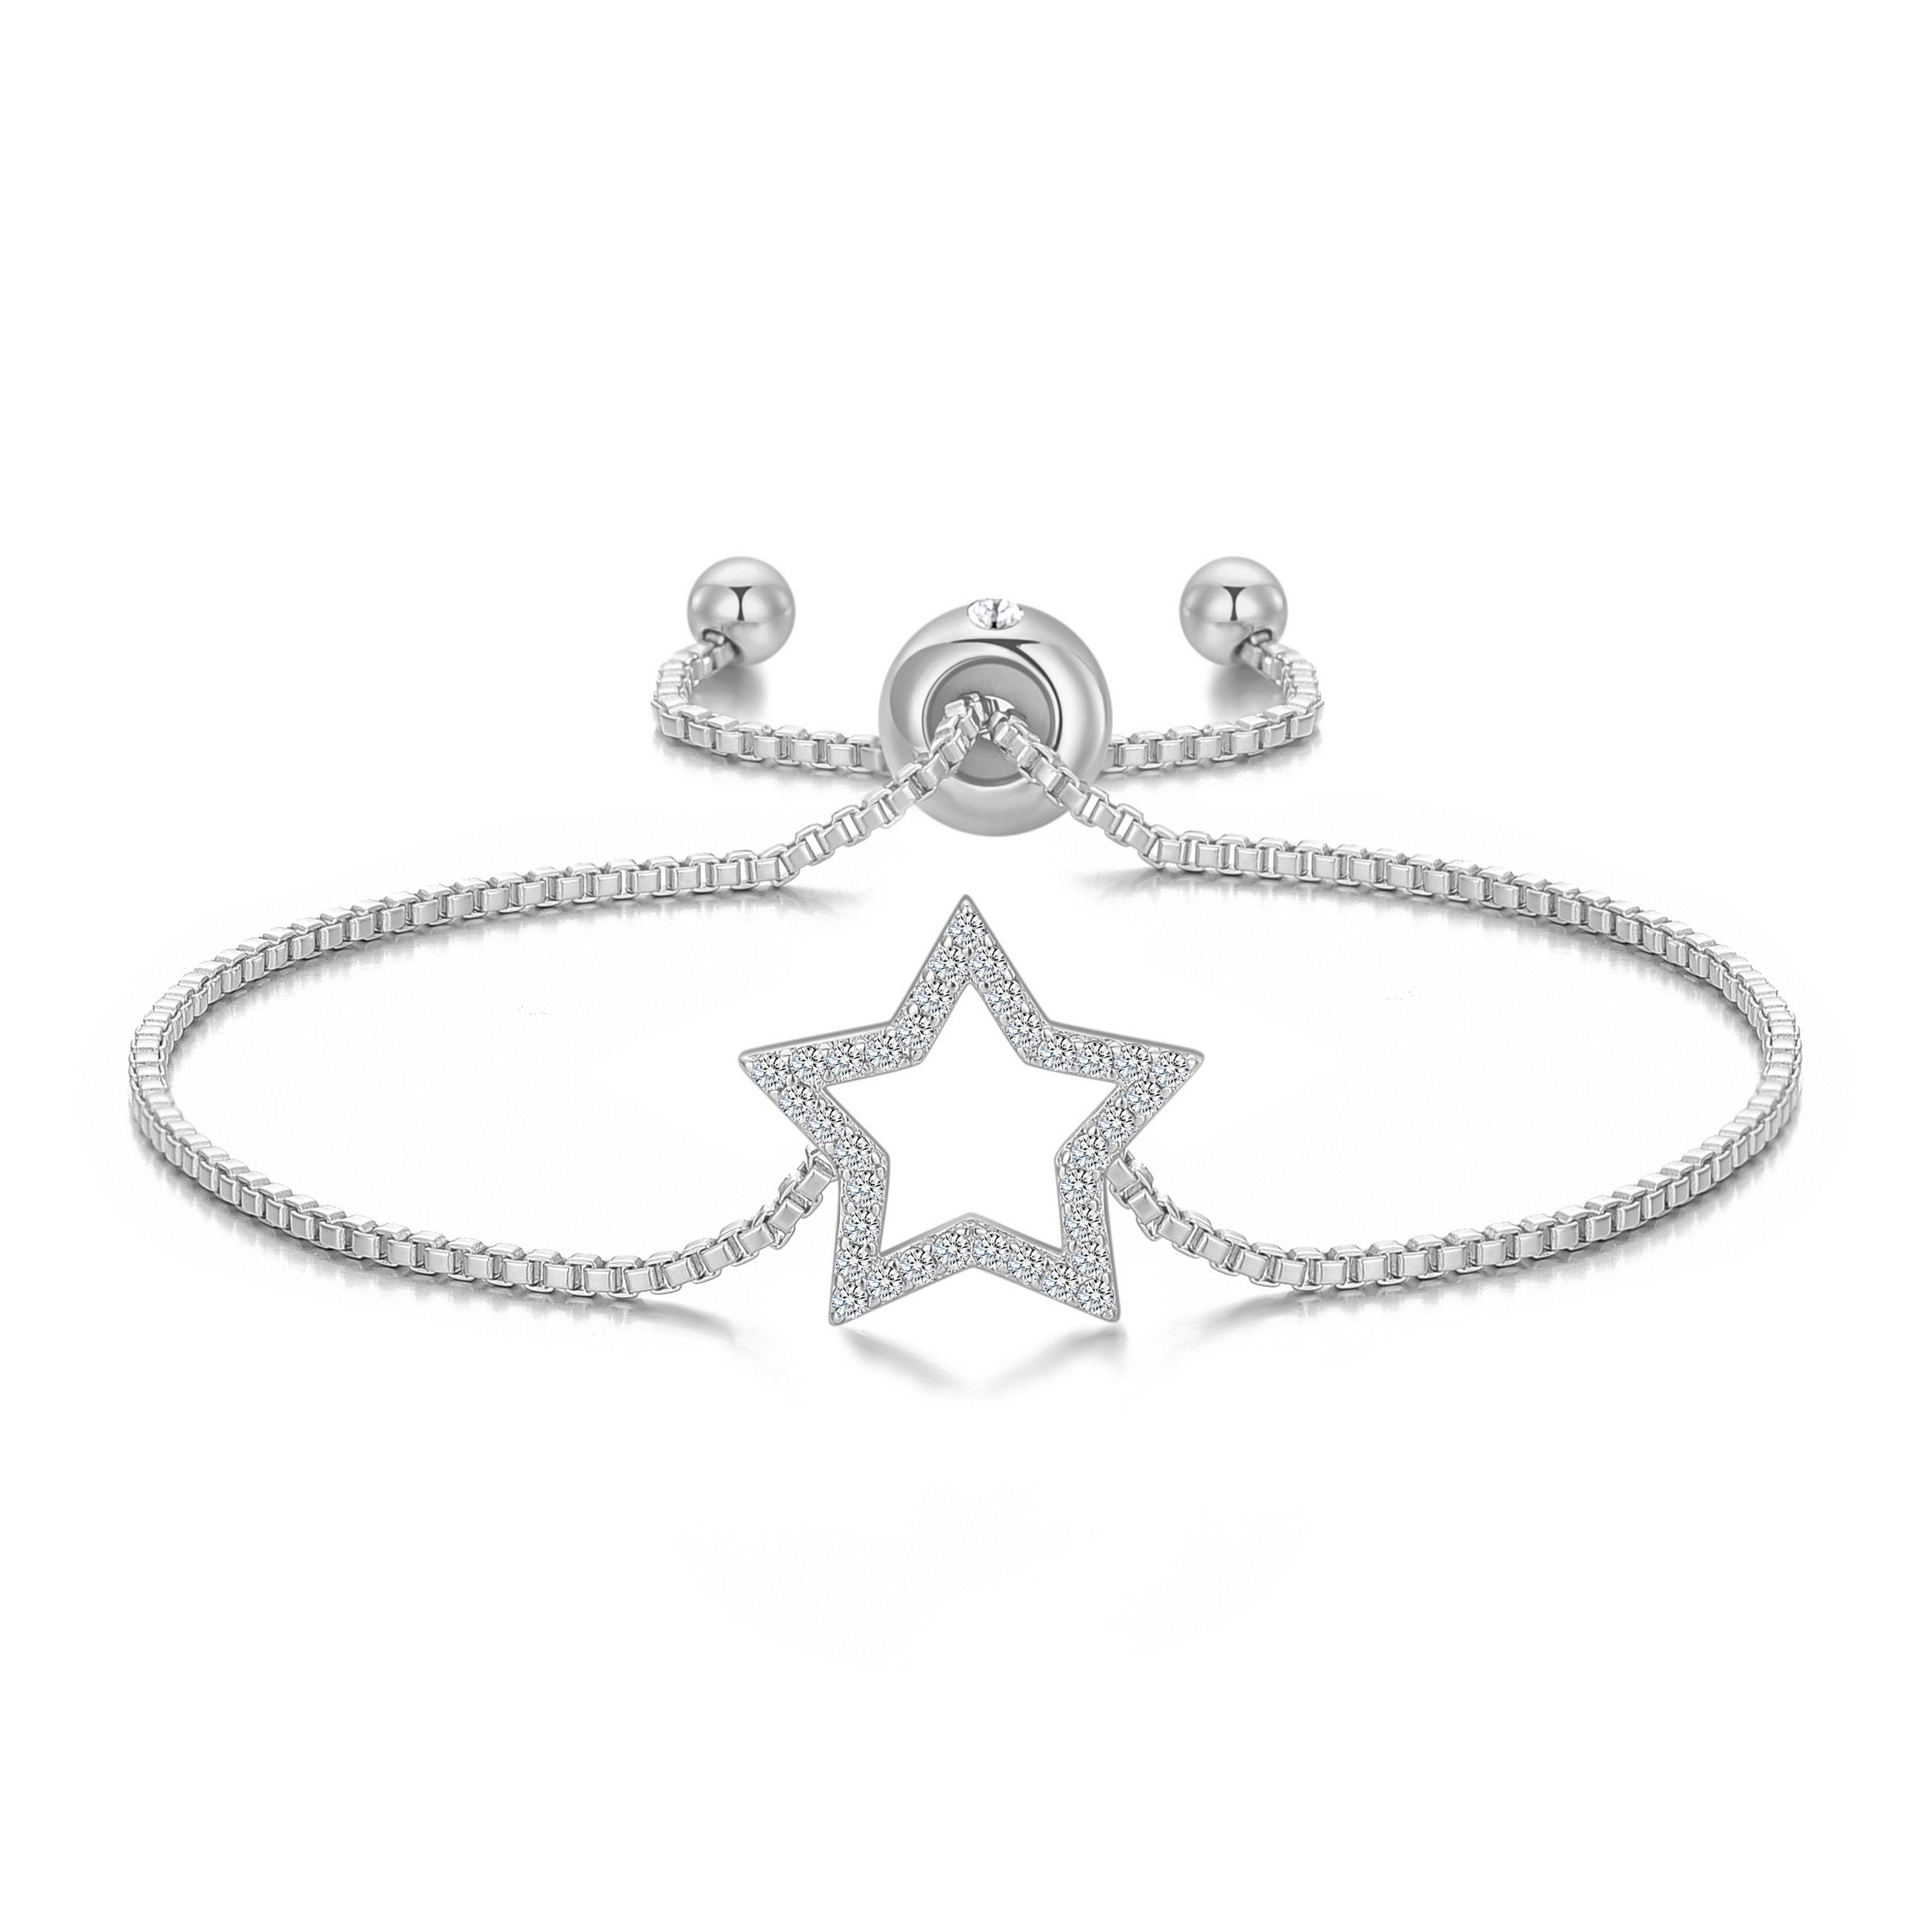 Silver Plated Star Friendship Bracelet Created with Zircondia® Crystals by Philip Jones Jewellery